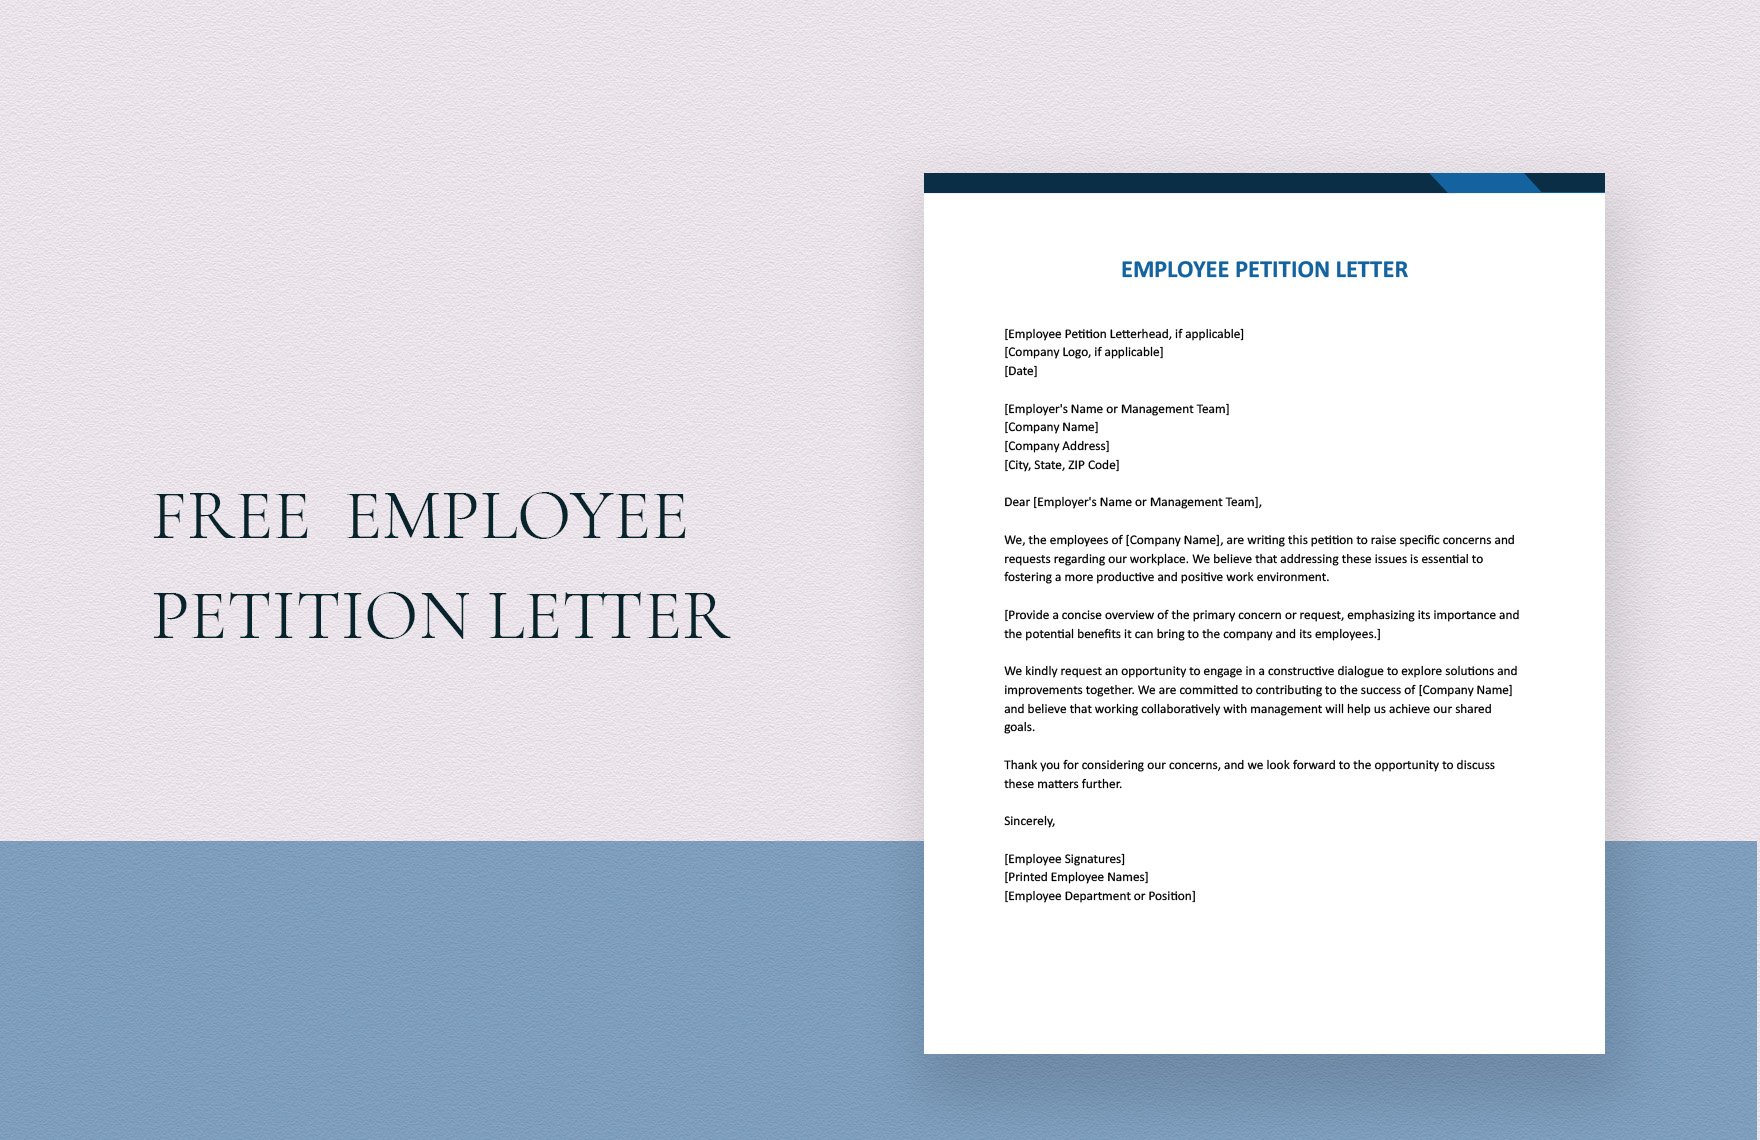 Employee Petition Letter